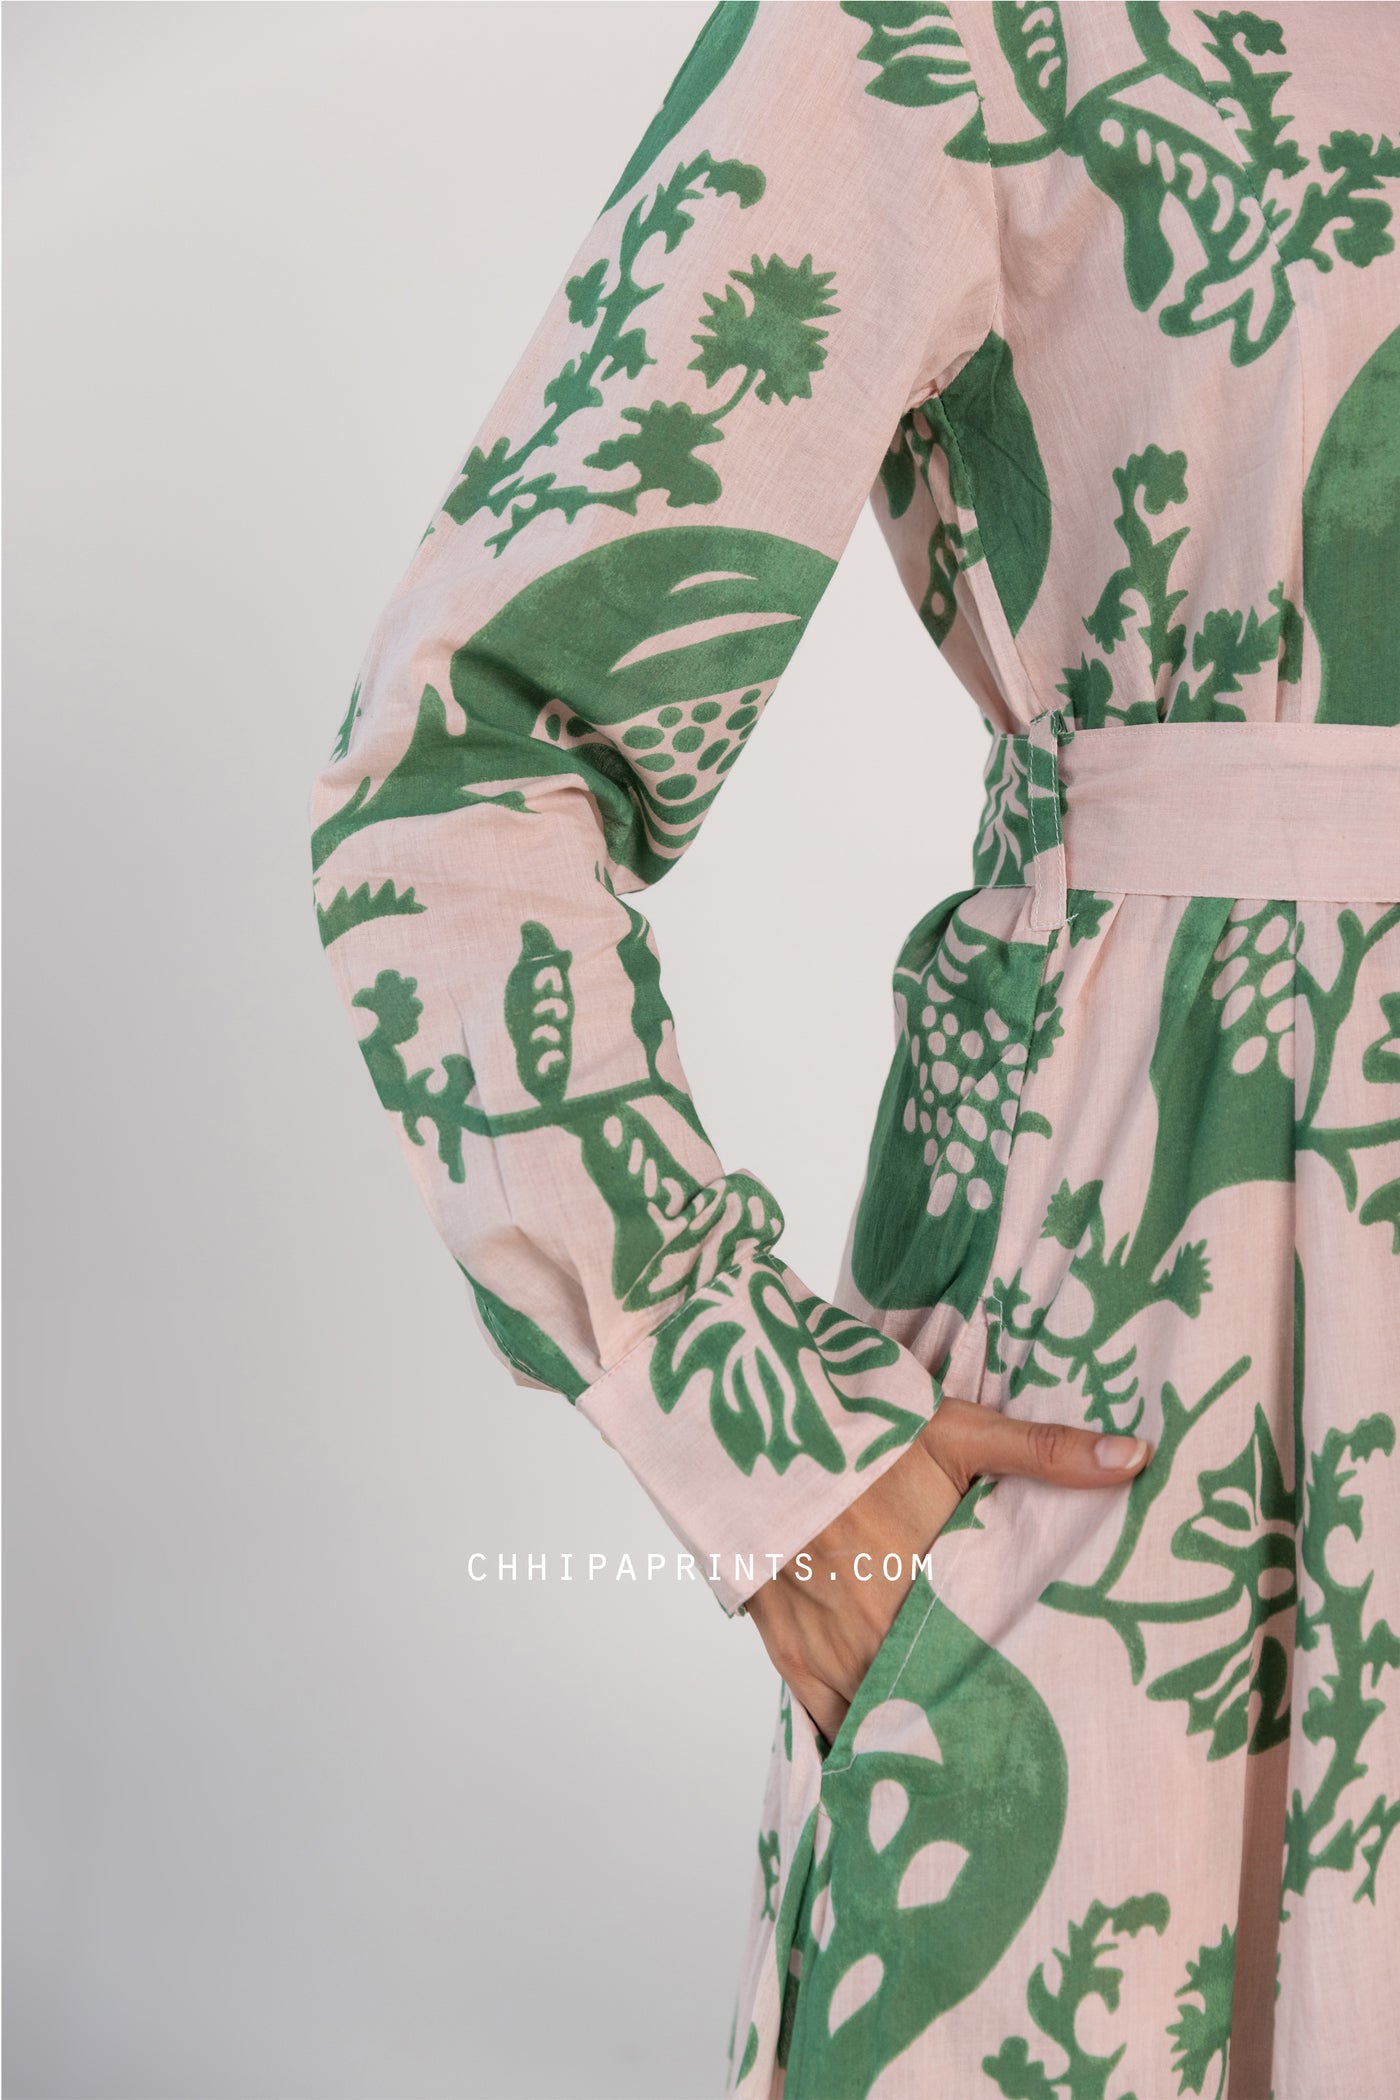 Cotton Anar Jaal Print Long Shirt Dress with Belt in Shades of Green and Pink